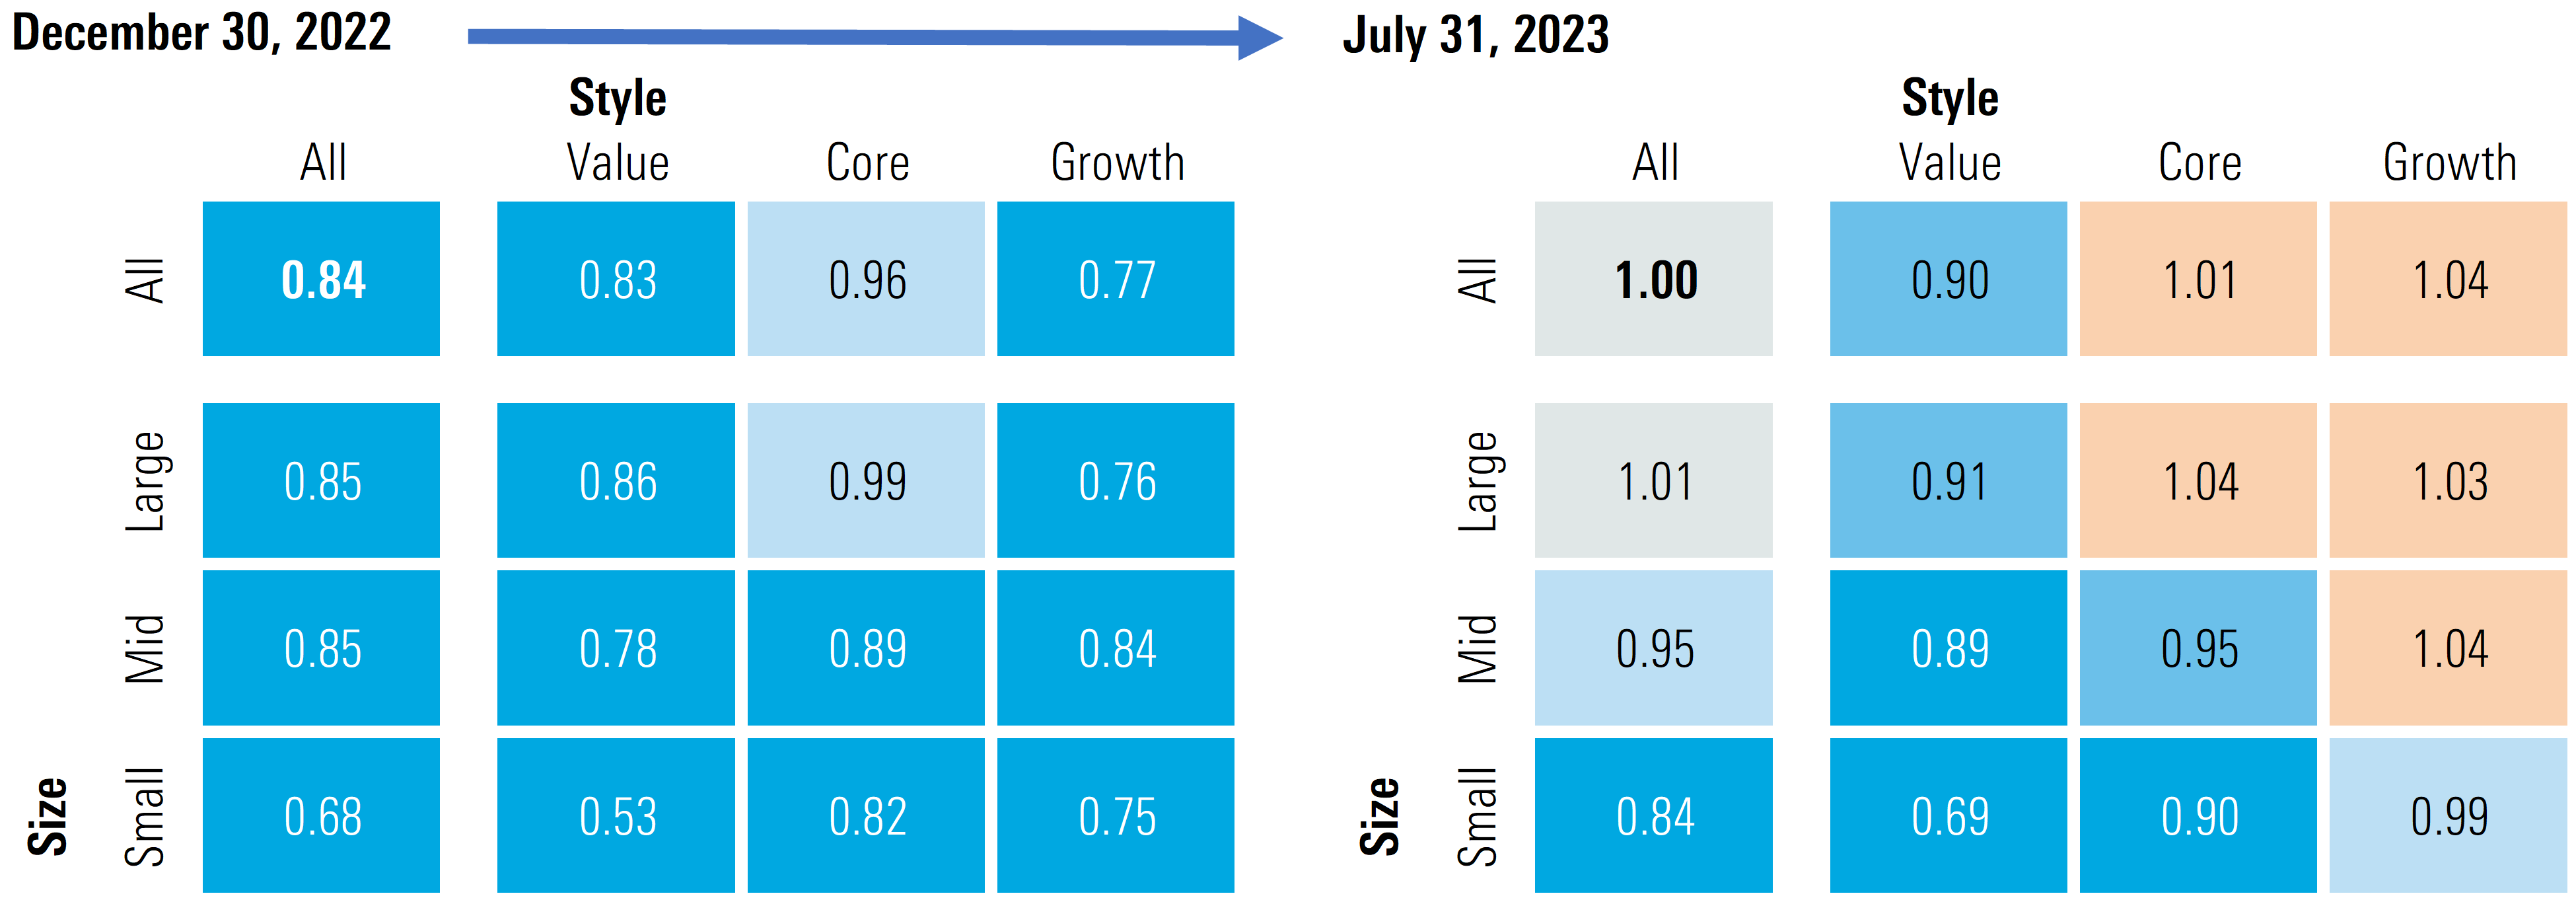 Graphic that shows how the price to fair value metric has progressed from December 30, 2022 through July 31, 2023.